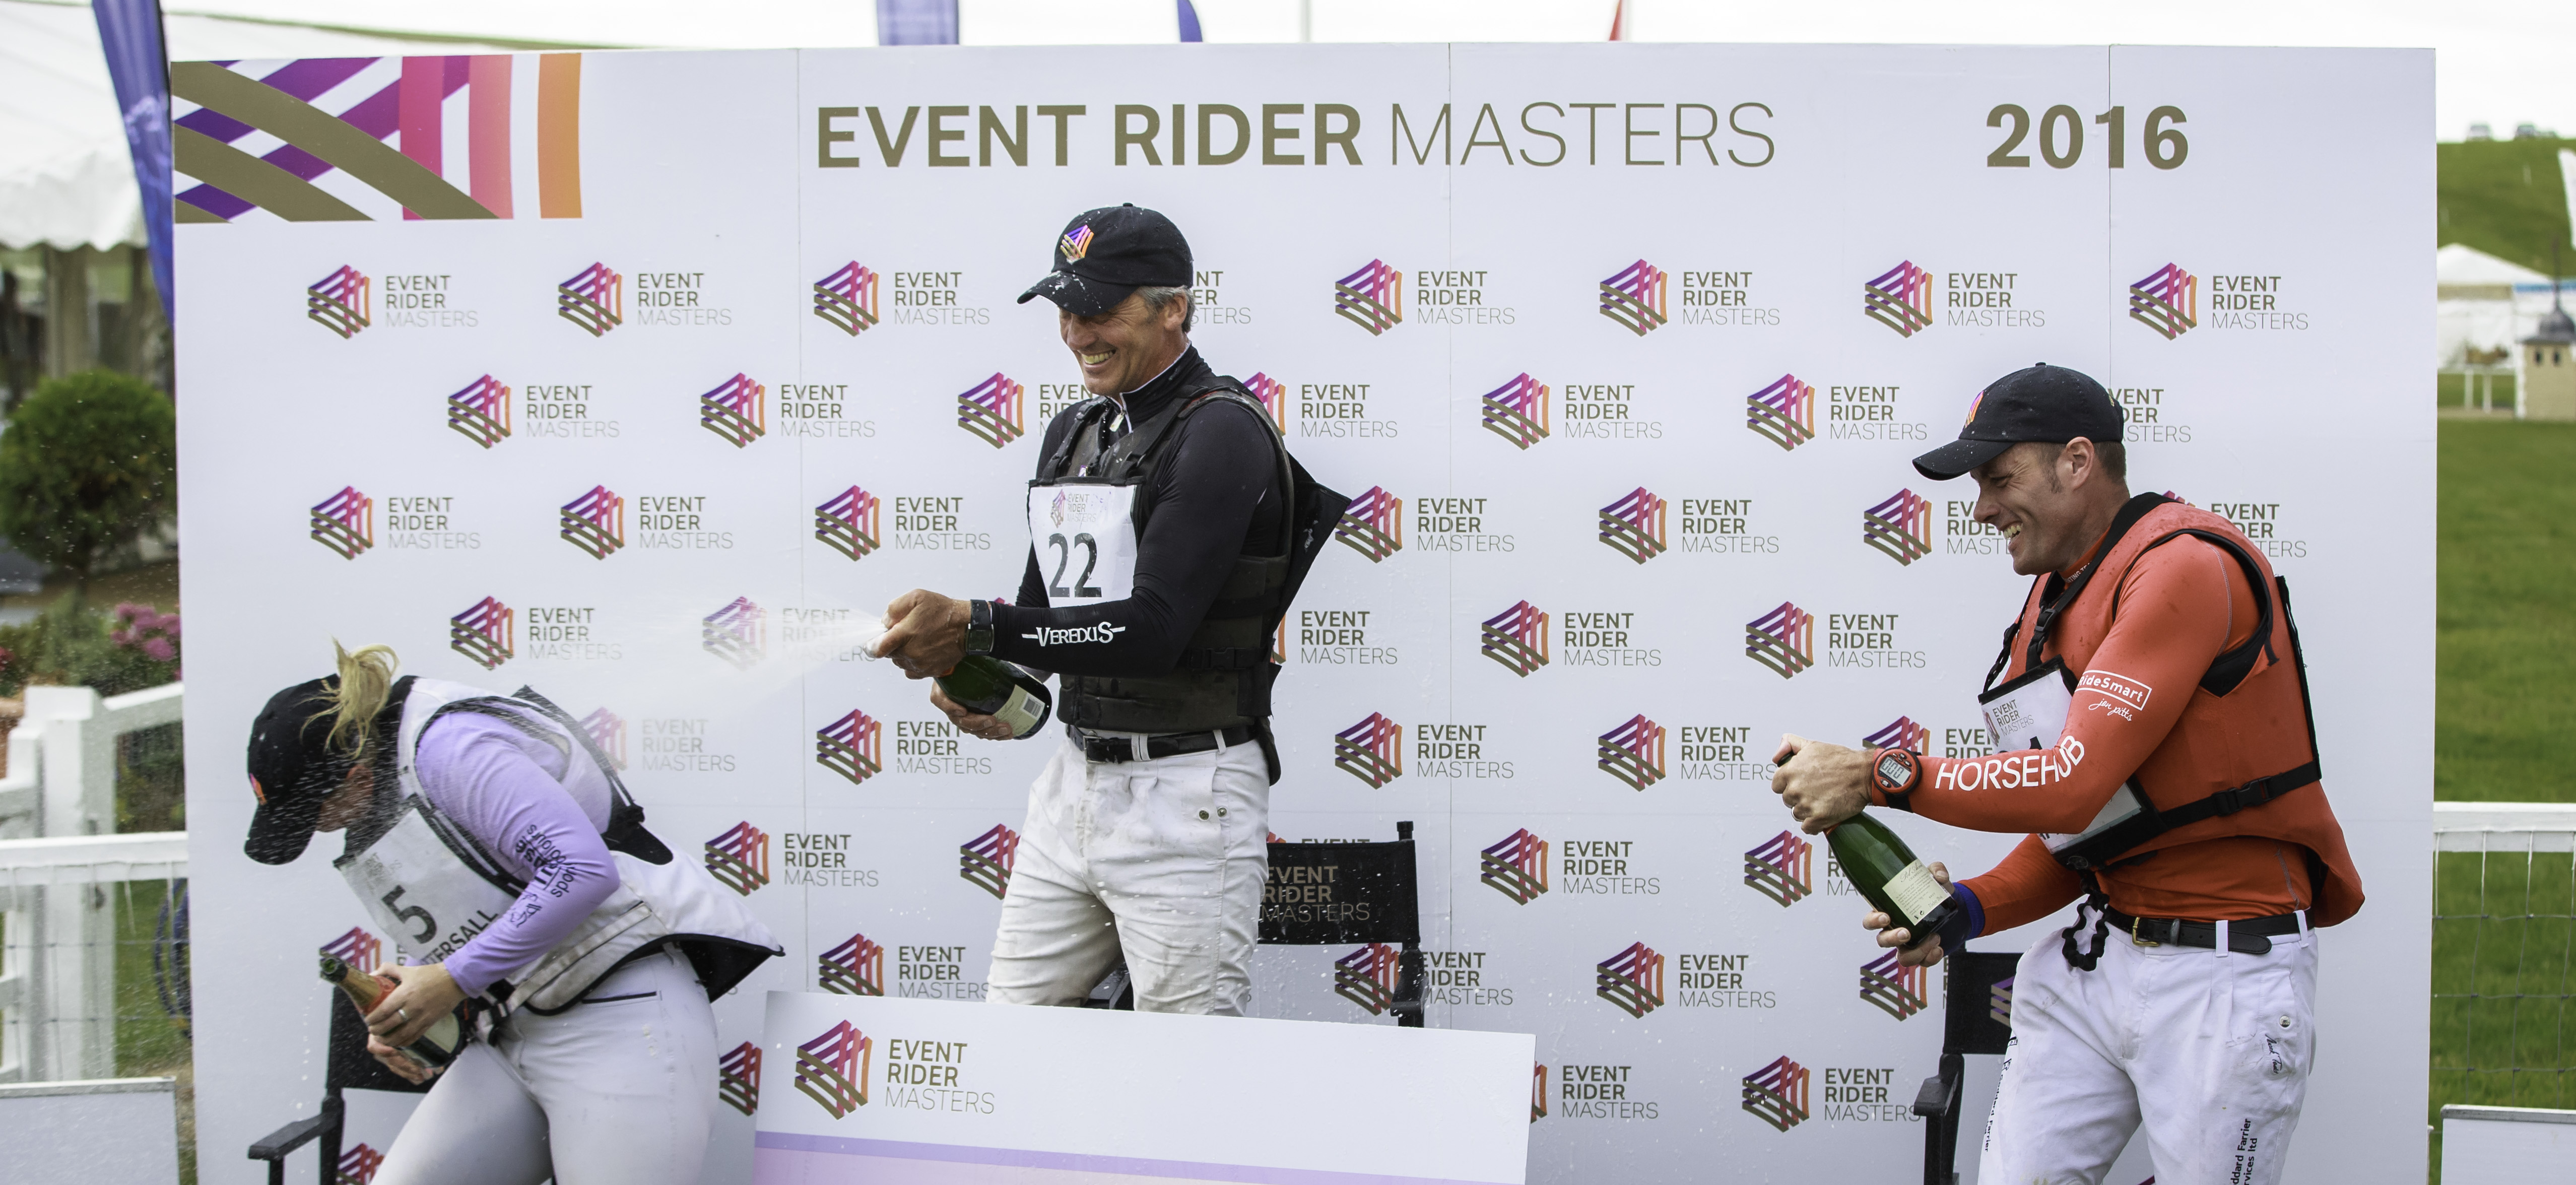 Barbury International Horse Trials - L-R Top three on the ERM podium Gemma Tattersall, Andrew Nicholson and Paul Tapner Photo Credit: Libby Law Photography & Eventridermasters.tv